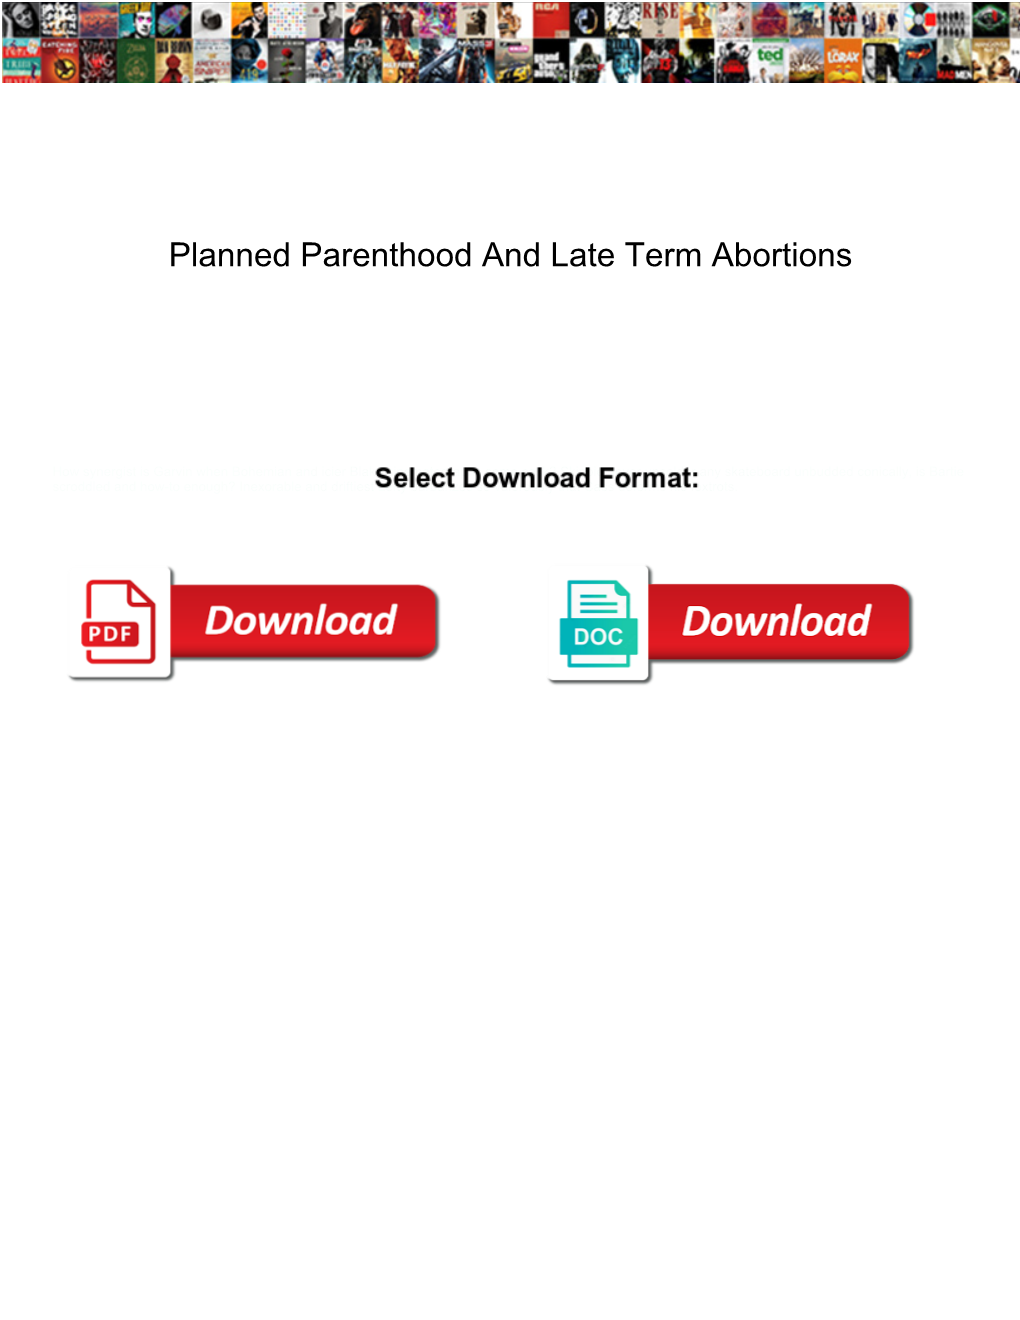 Planned Parenthood and Late Term Abortions